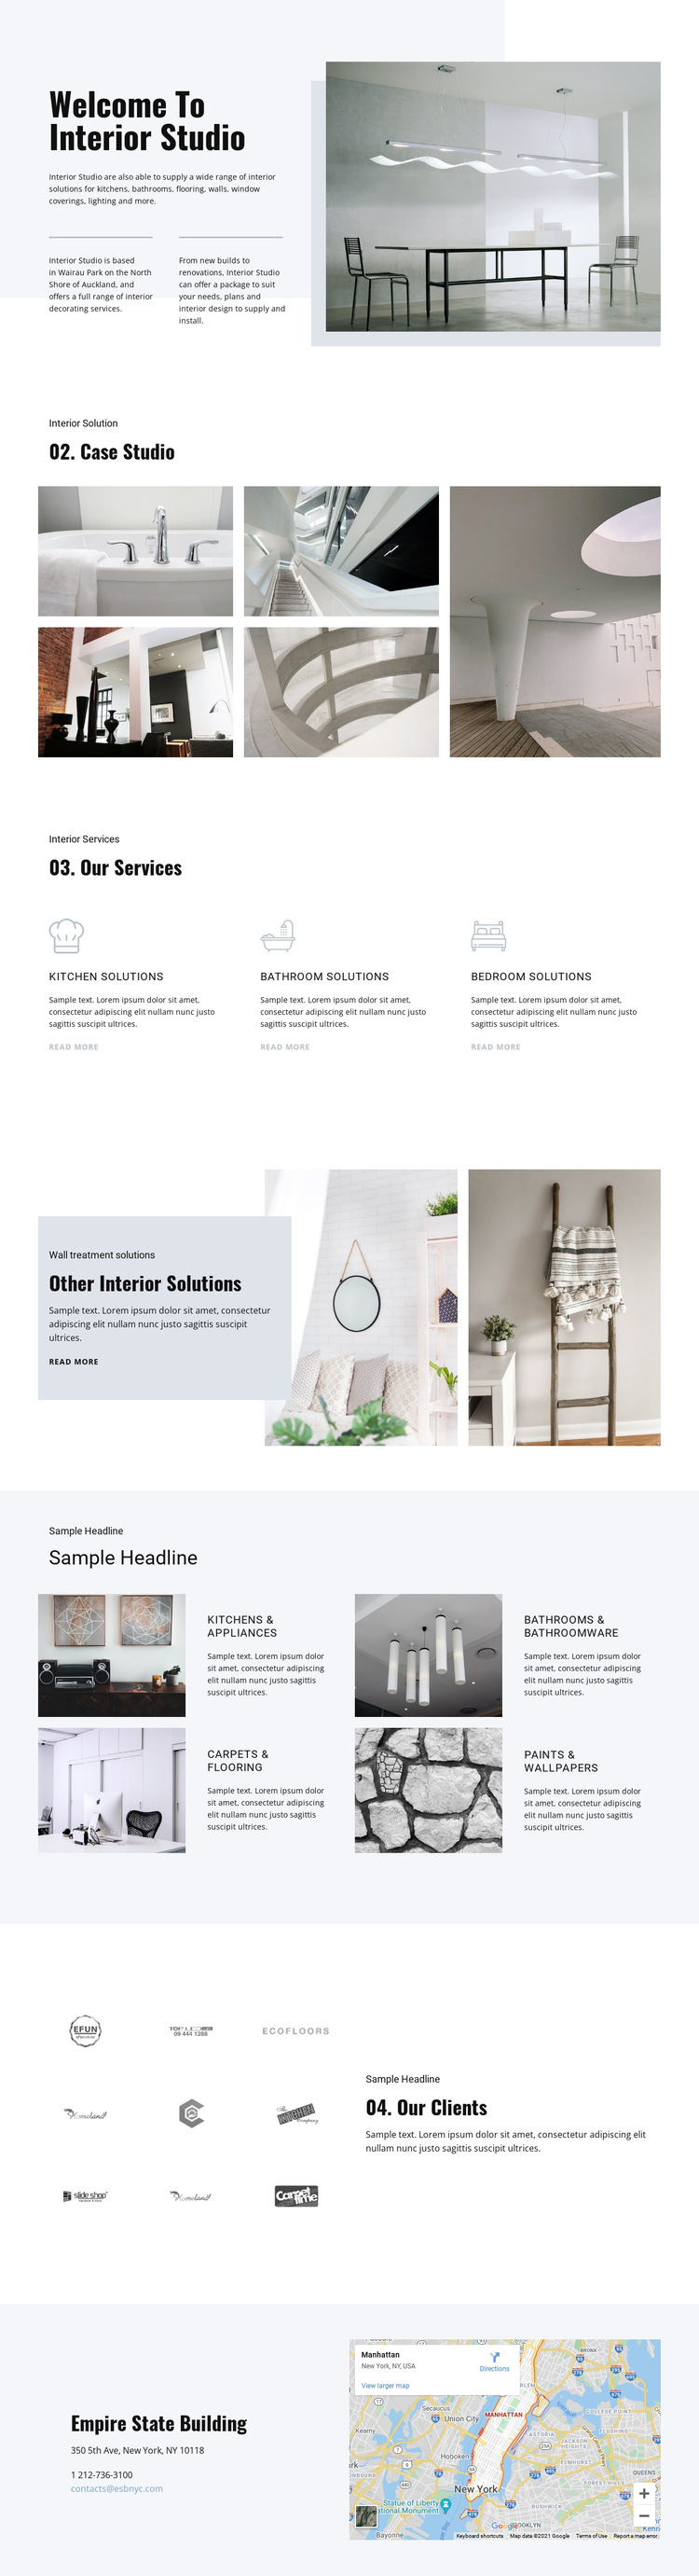 Welcome to interior studio HTML5 Template